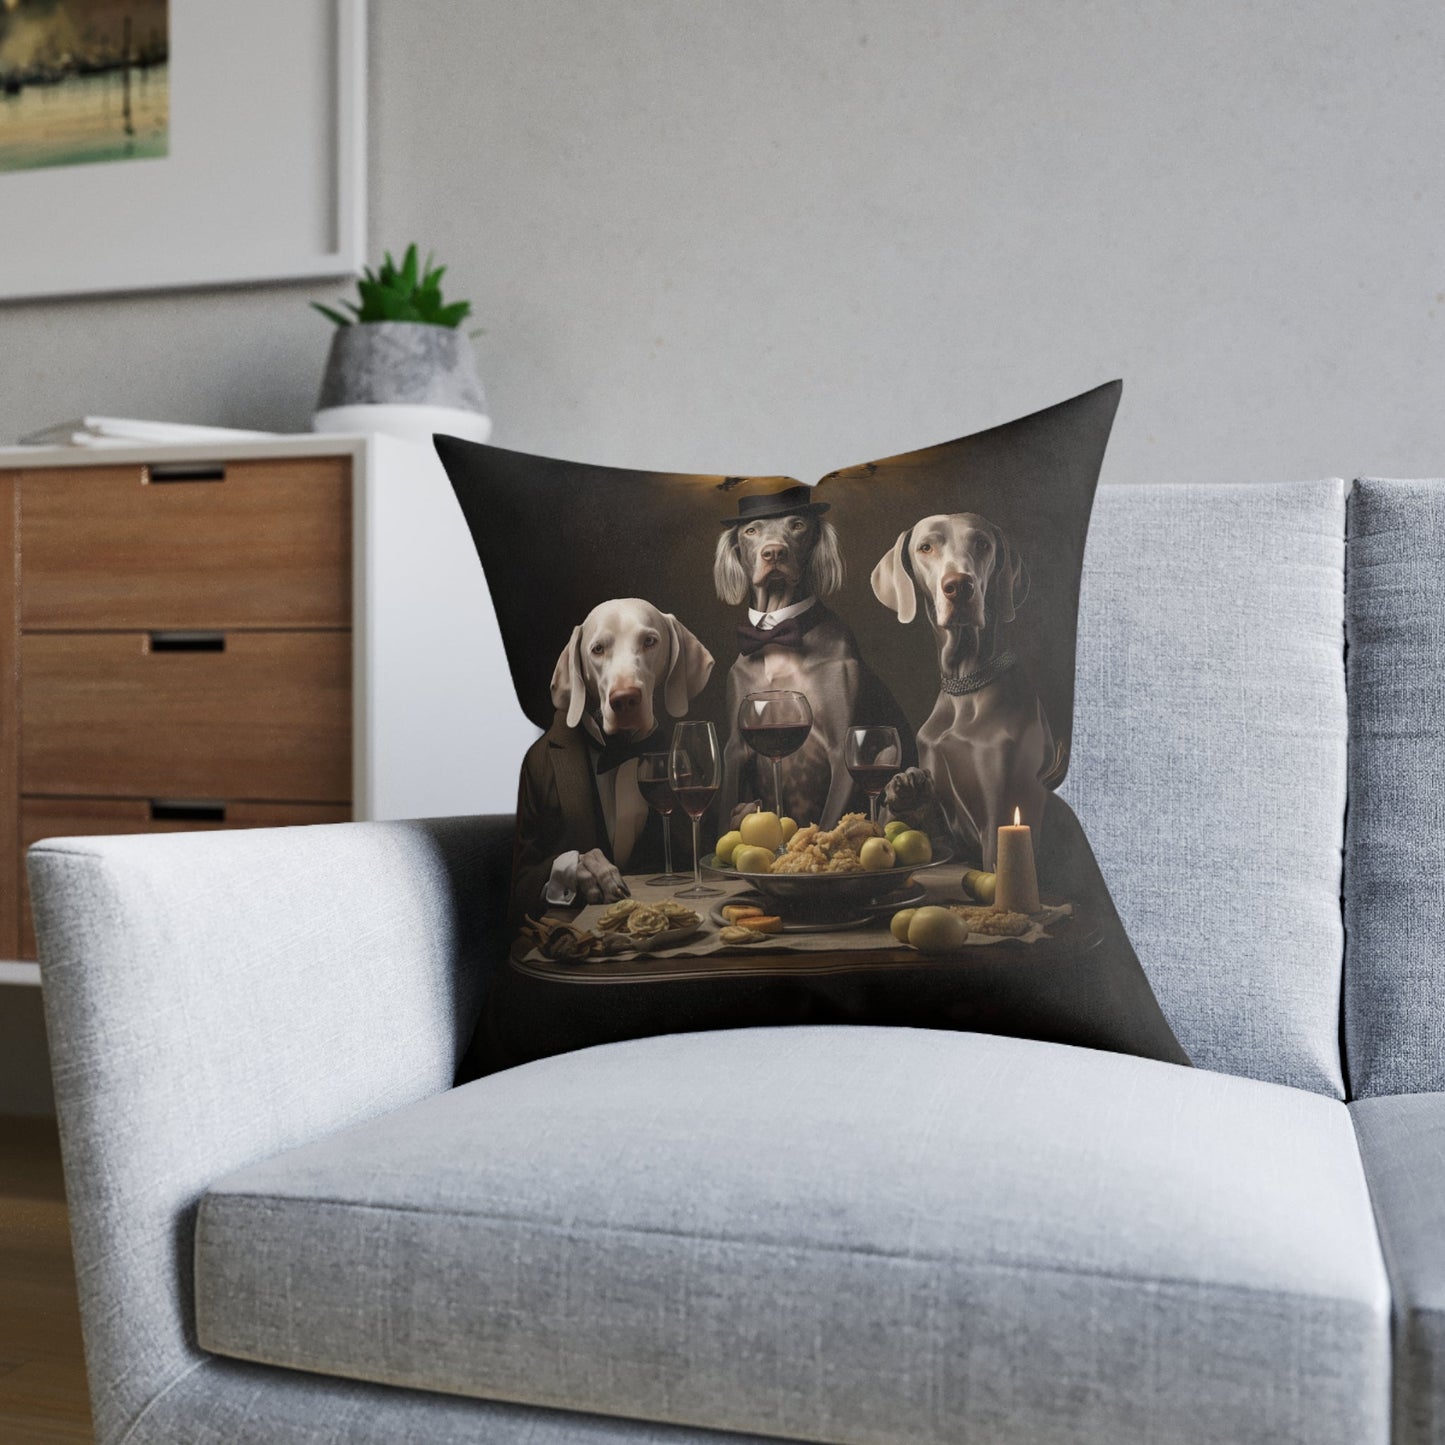 Square cushion with Weimaraners at Liquid Lunch Design - Hobbster